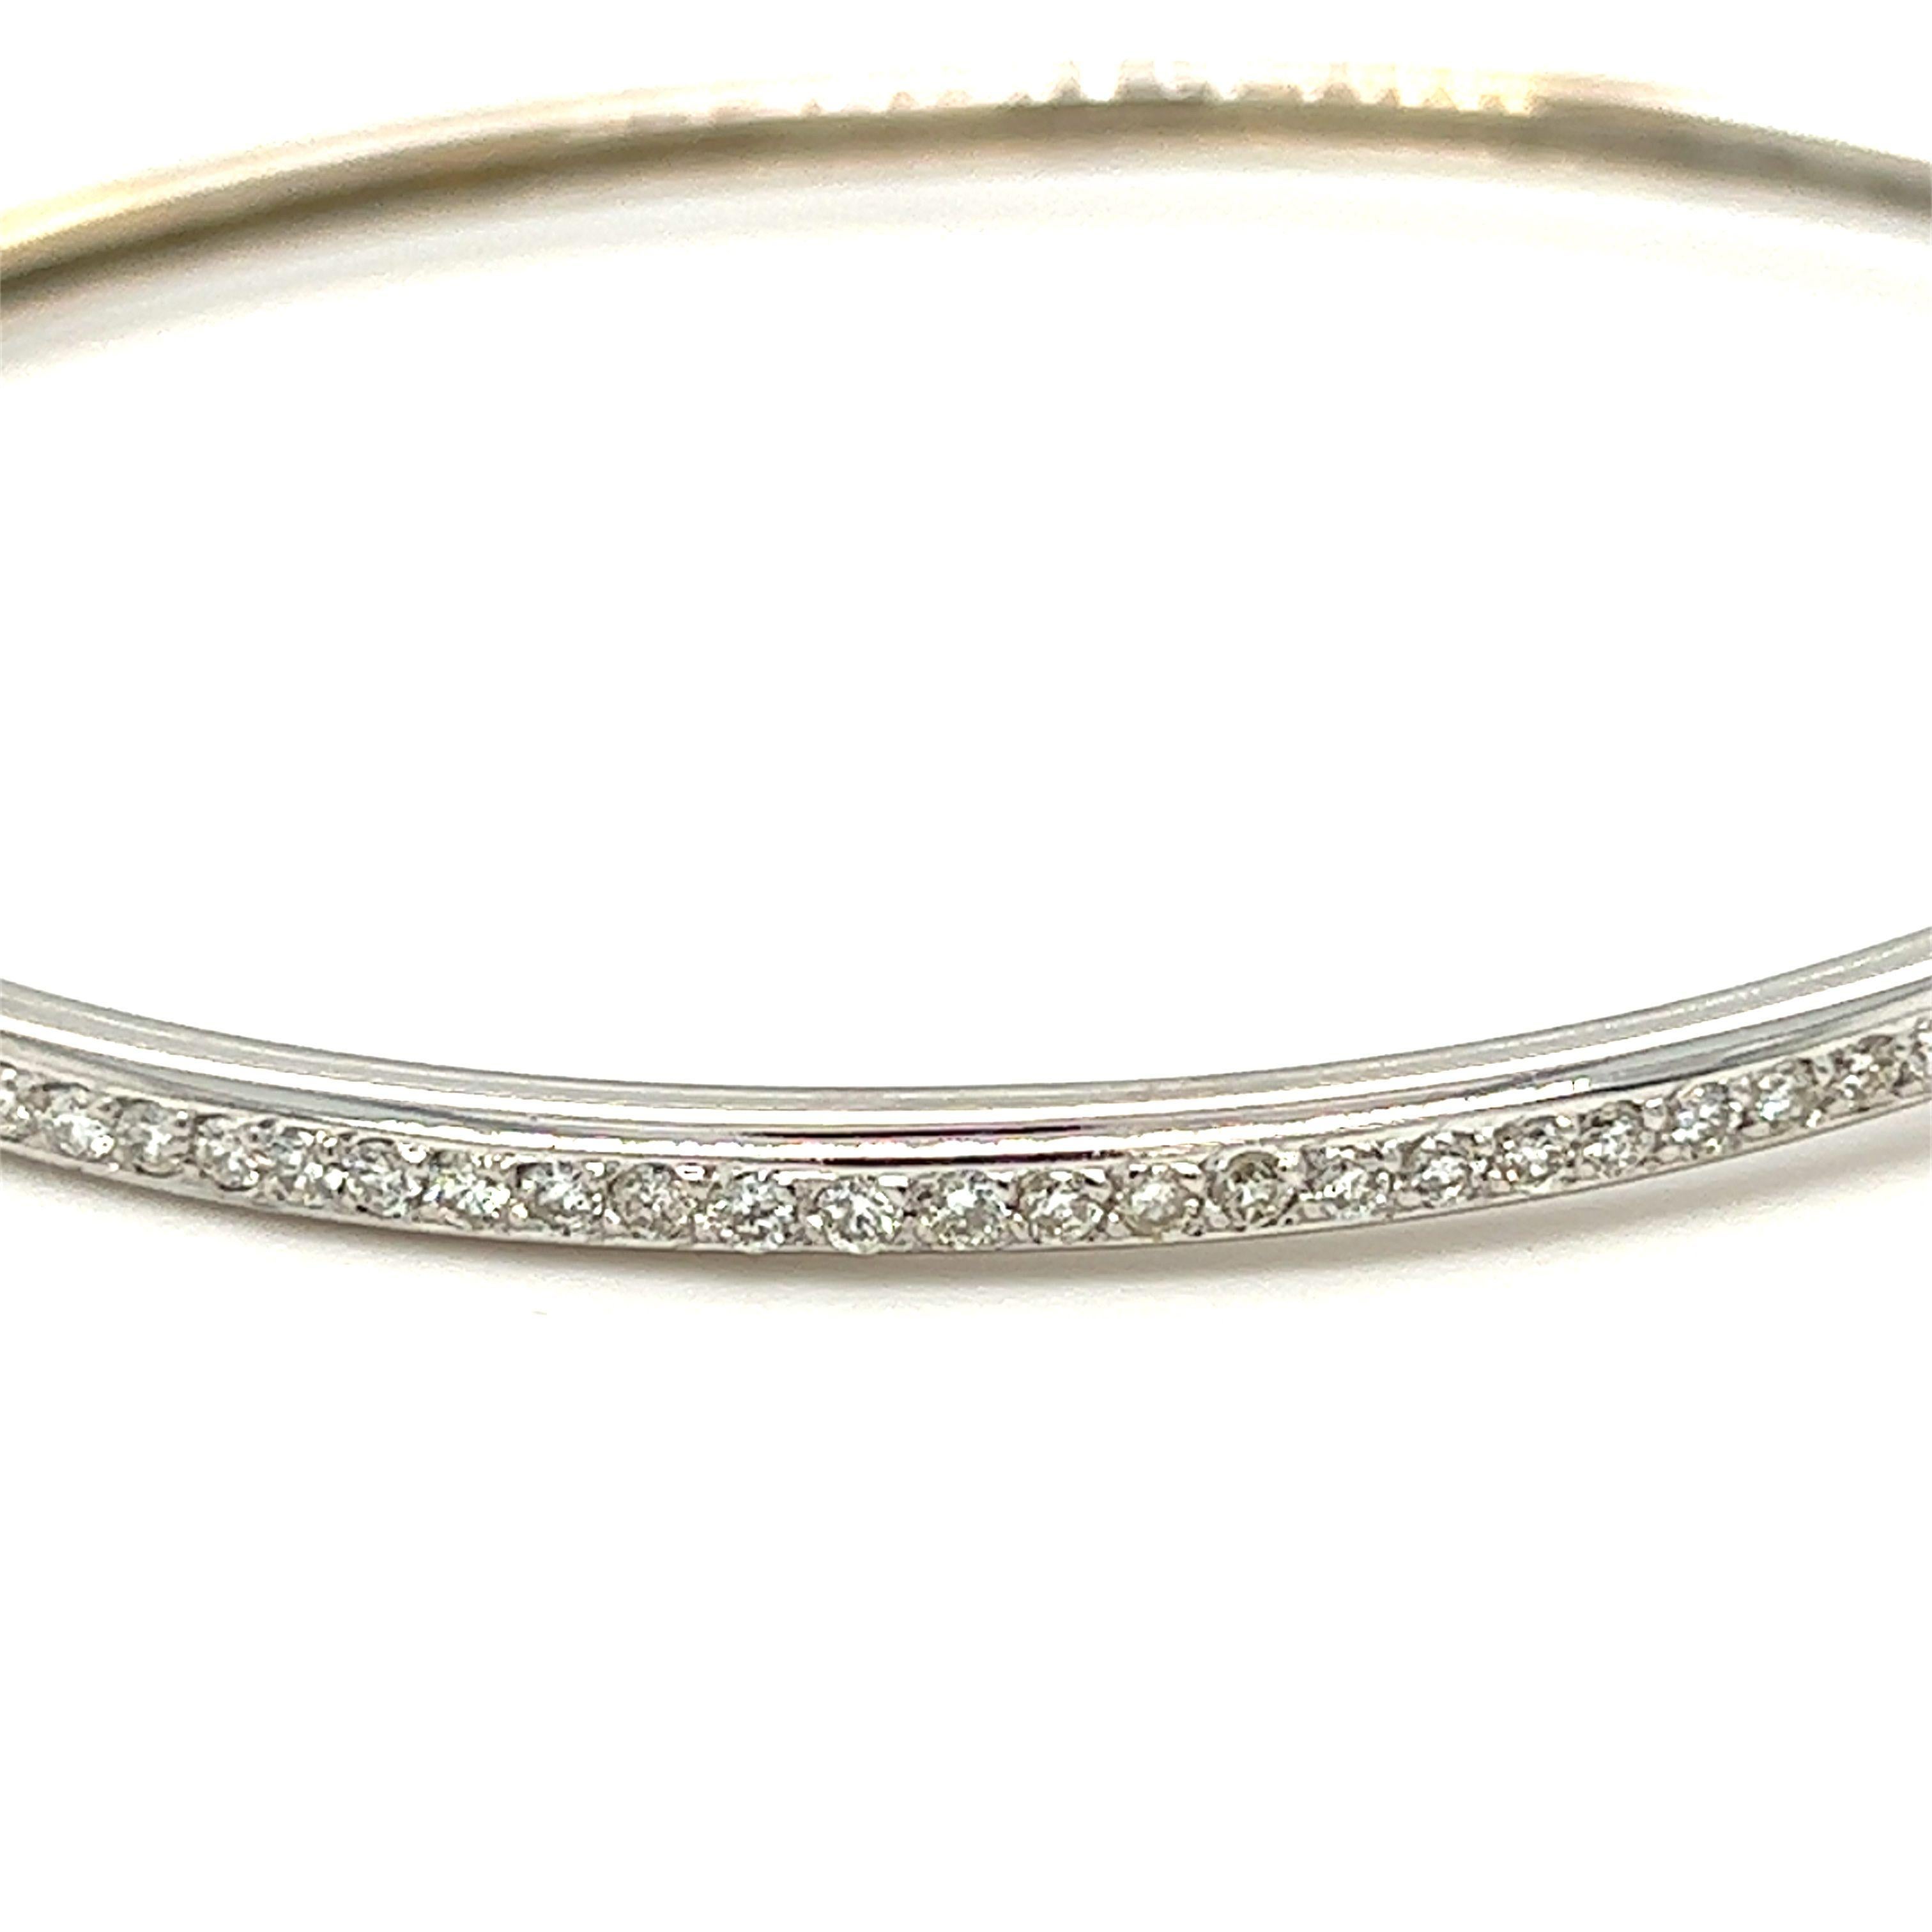 Diamond Bracelet Bangle with Security Chain 14k White Gold In Excellent Condition For Sale In beverly hills, CA